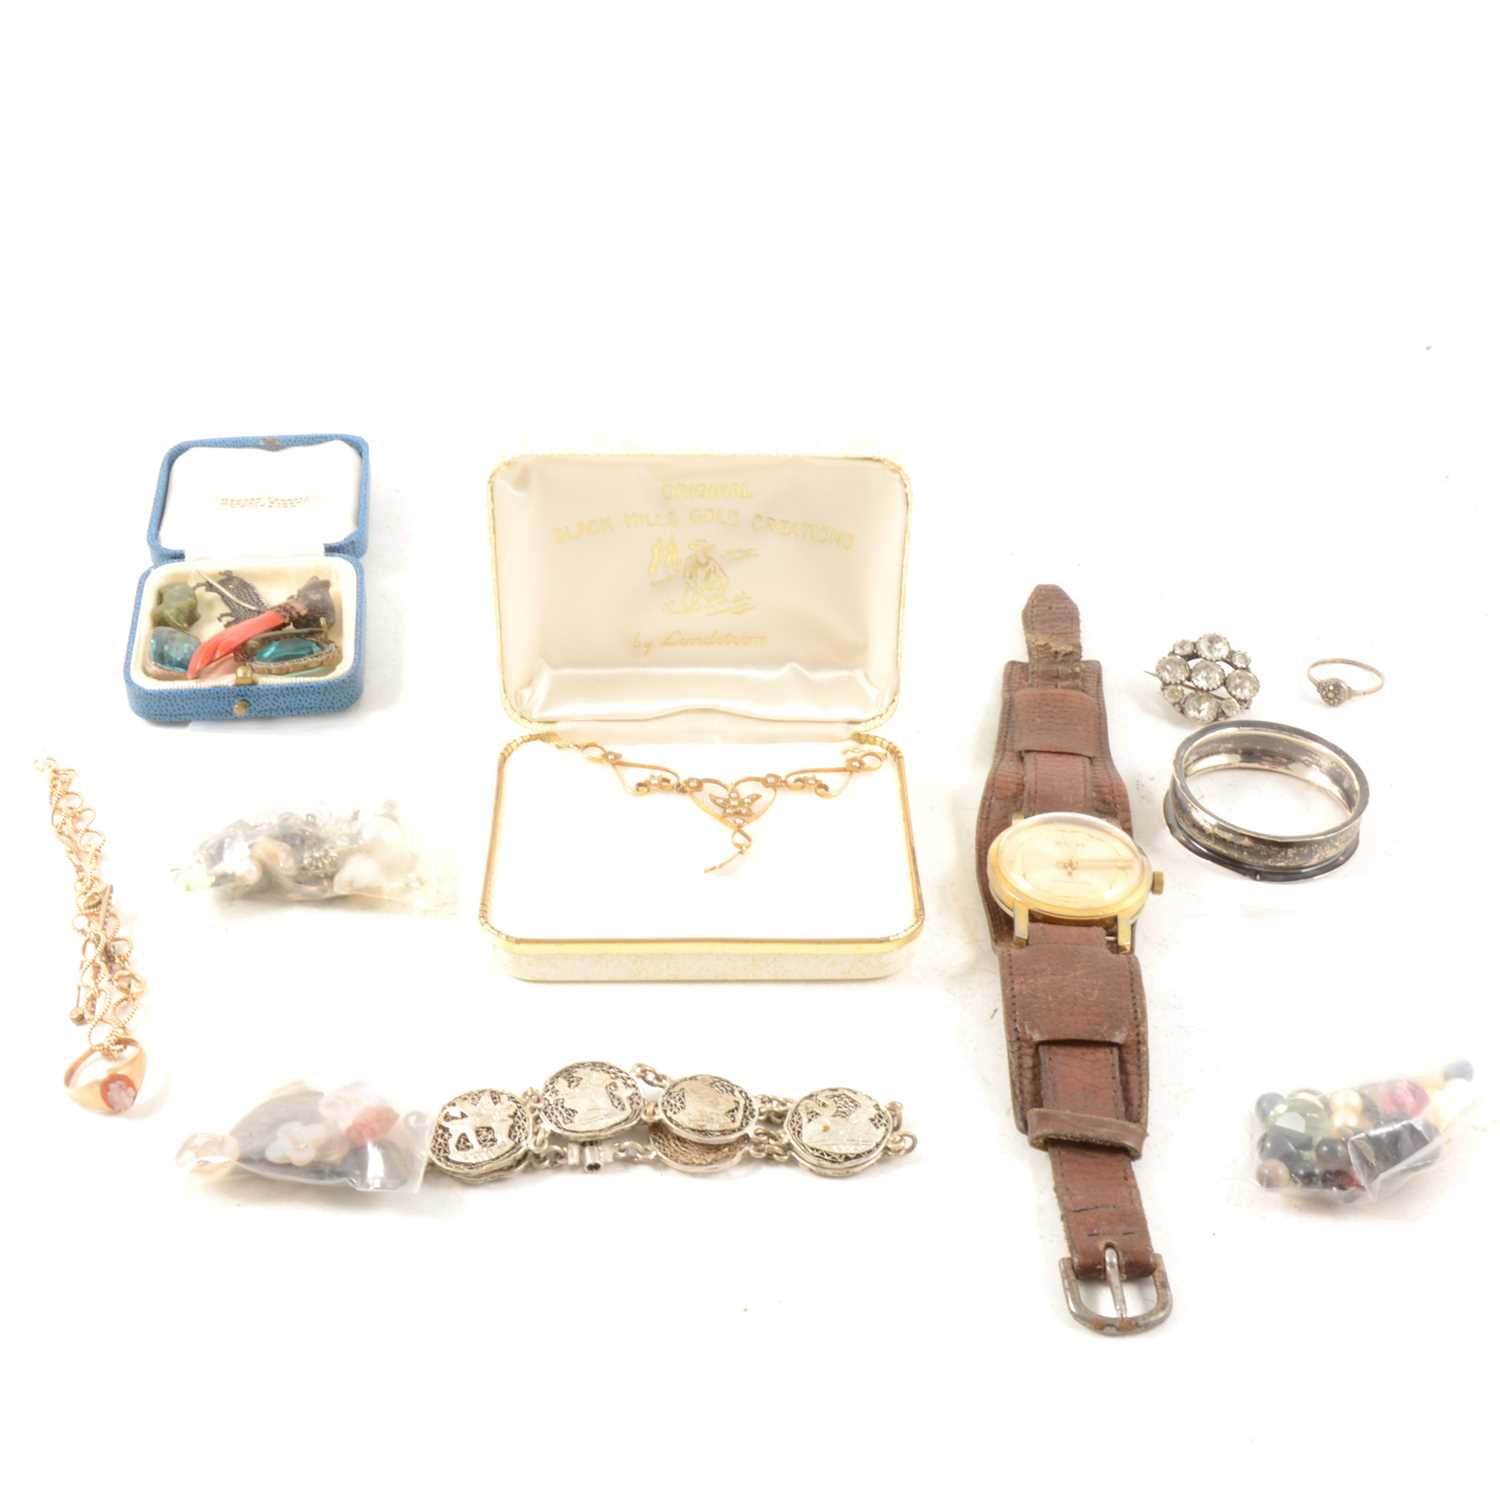 Lot 128 - 9ct. gold rope link bracelet, a 9ct. Cameo ring, a pendant marked 14k. together with a silver napkin ring, an Egyptian bracelet, a wristwatch and a quantity of loose stones etc.